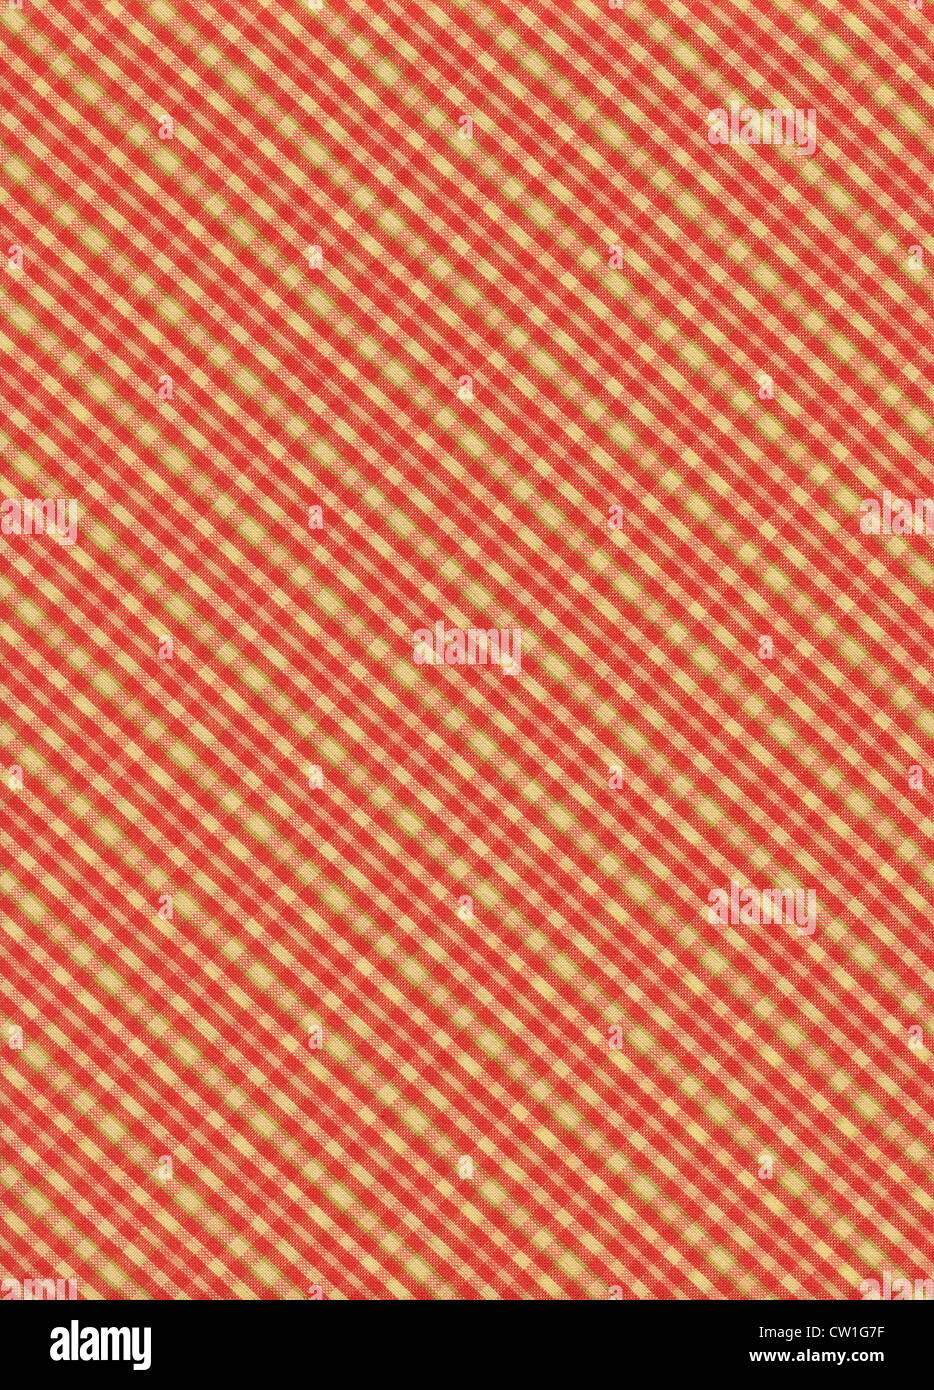 Red white and green plaid gingham fabric textile background. Stock Photo